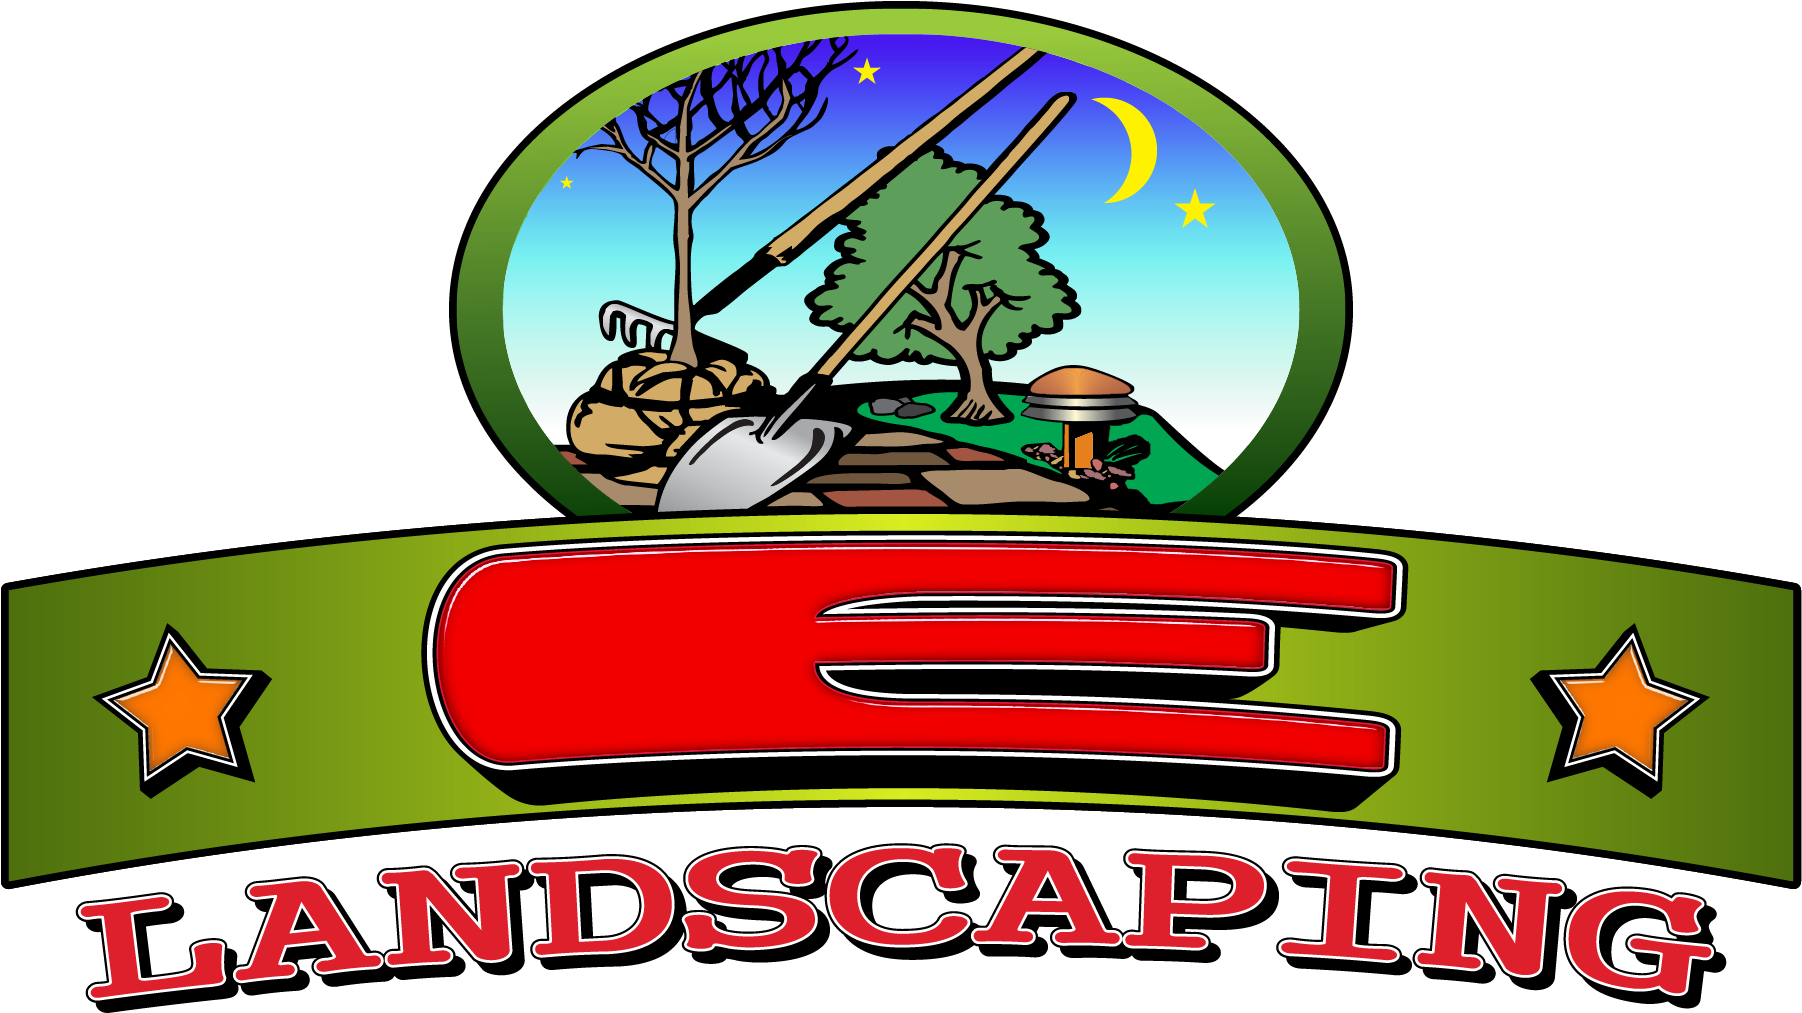 Treasure Valley Landscaping, Patio & Sprinkler Professionals - E Landscaping, Llc (1801x1063)